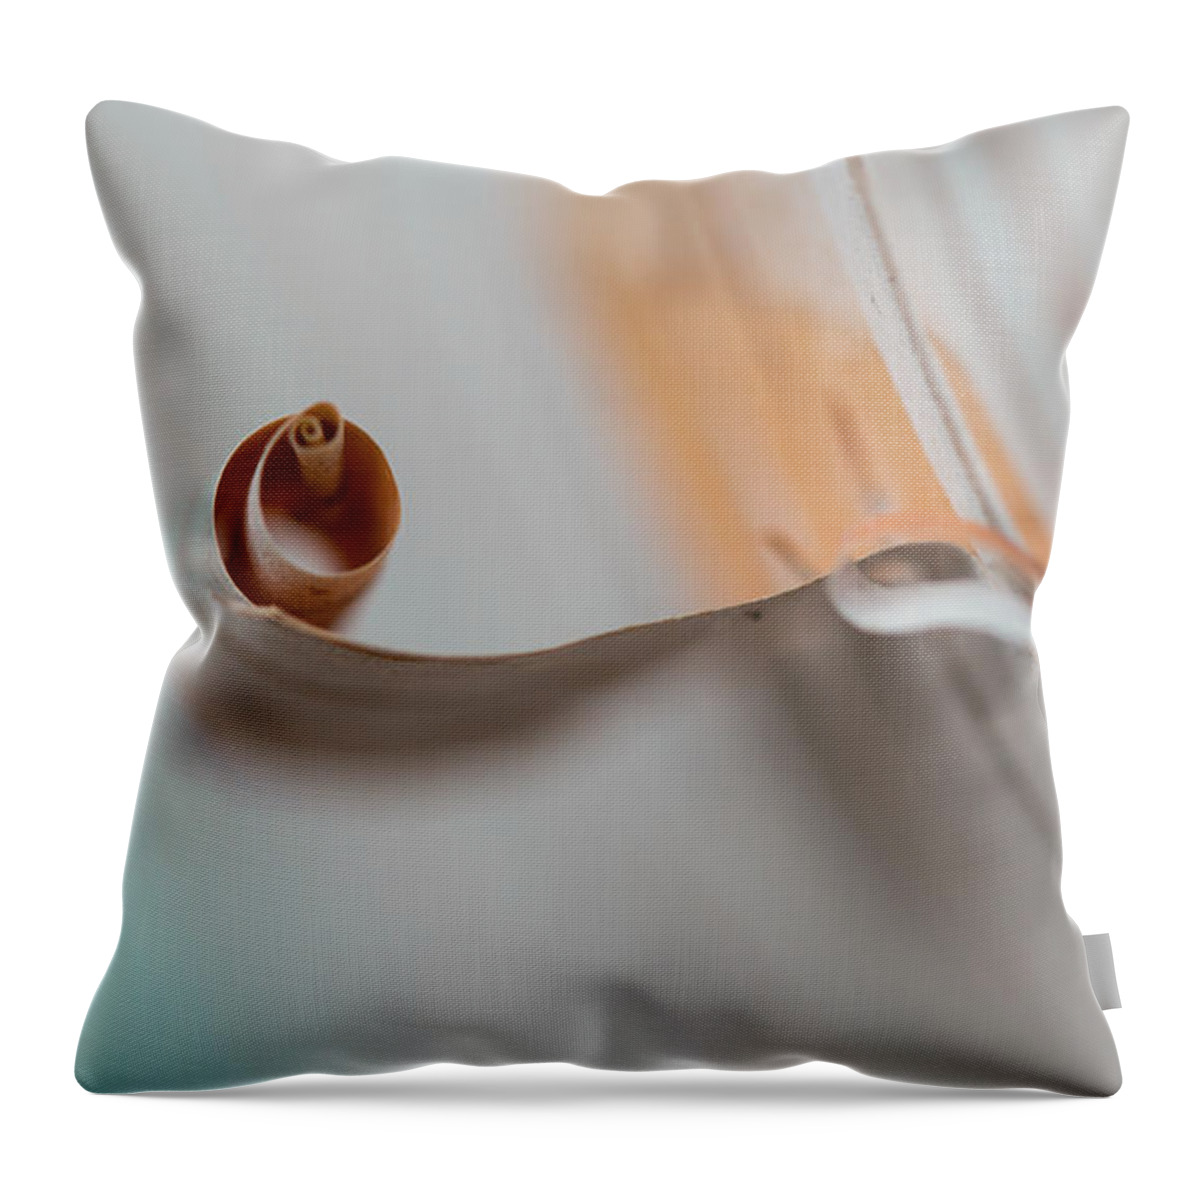 Abstract Throw Pillow featuring the photograph Birch Bark by Jakub Sisak